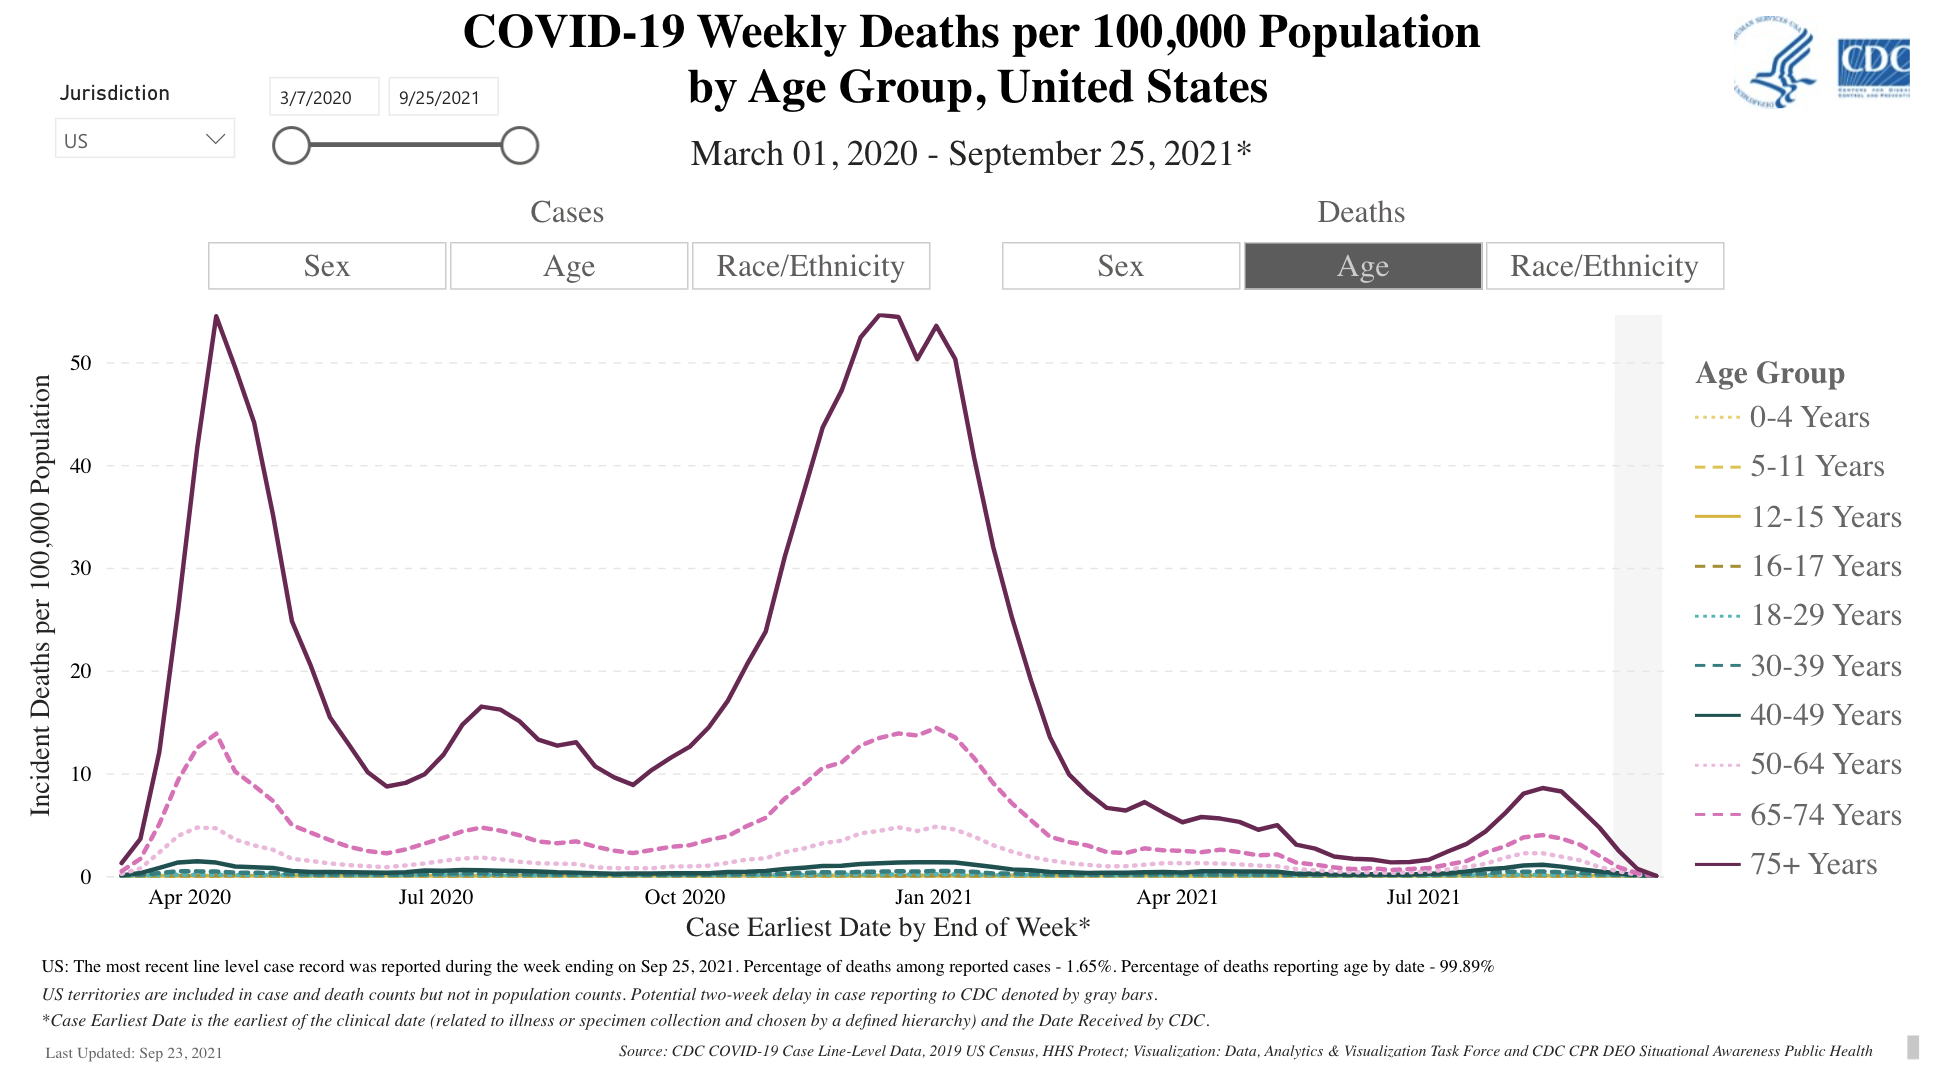 Death rates remain exceedingly low in children, you can’t even see the kids line on this graph